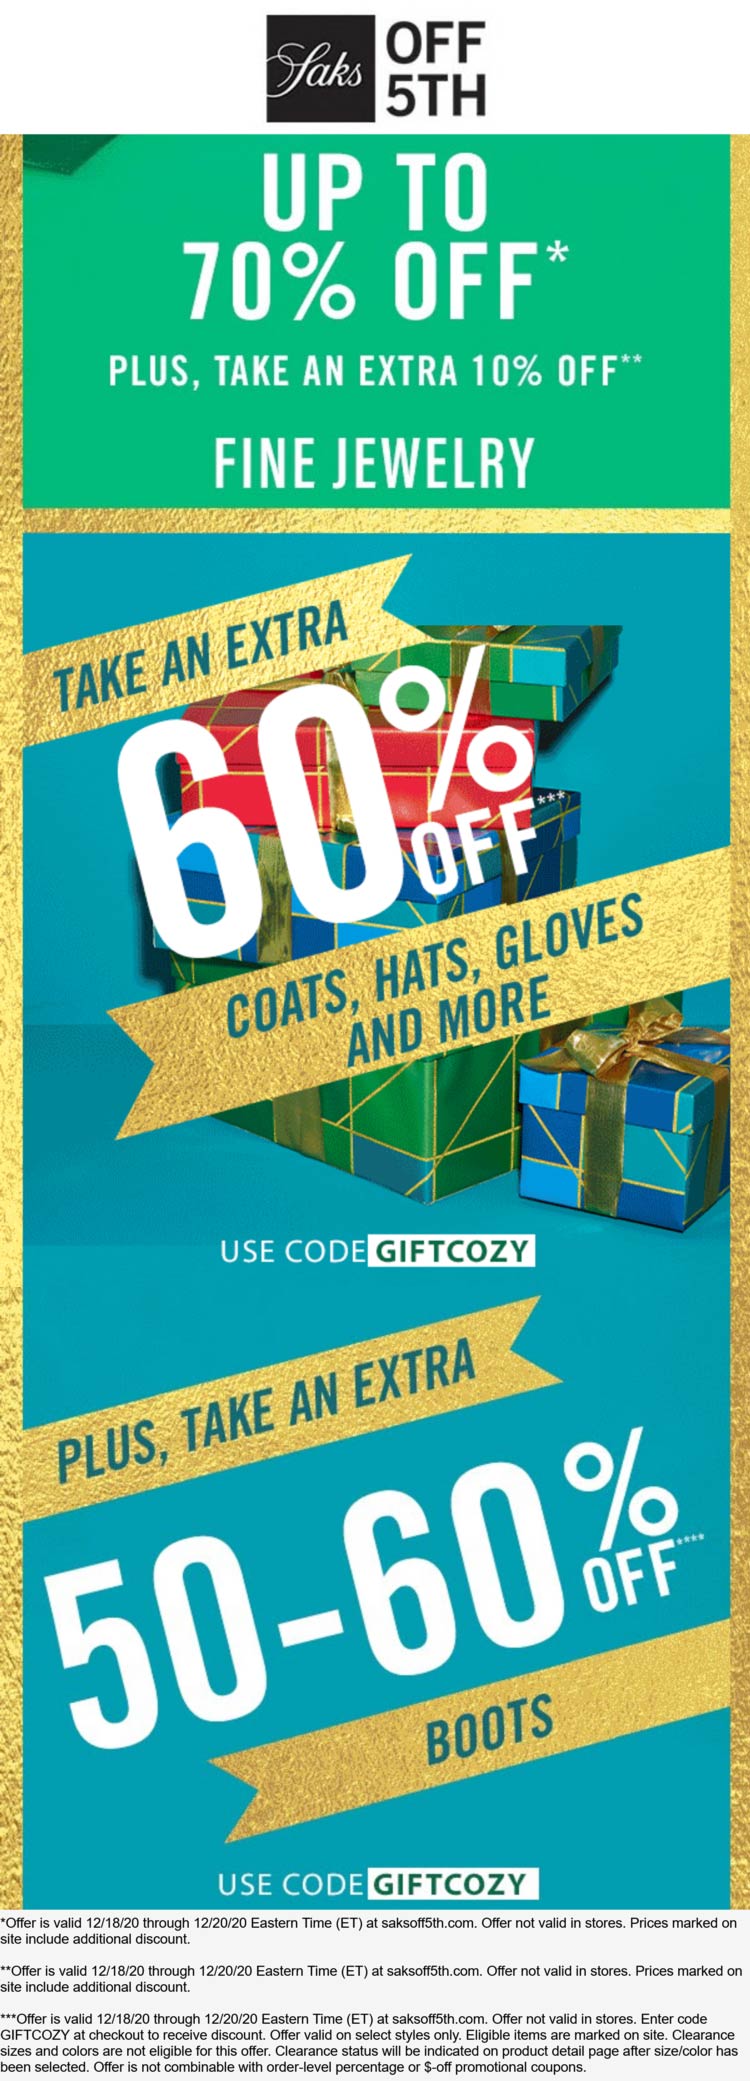 OFF 5TH stores Coupon  Extra 60% off outerwear & more at Saks OFF 5TH via promo code GIFTCOZY #off5th 